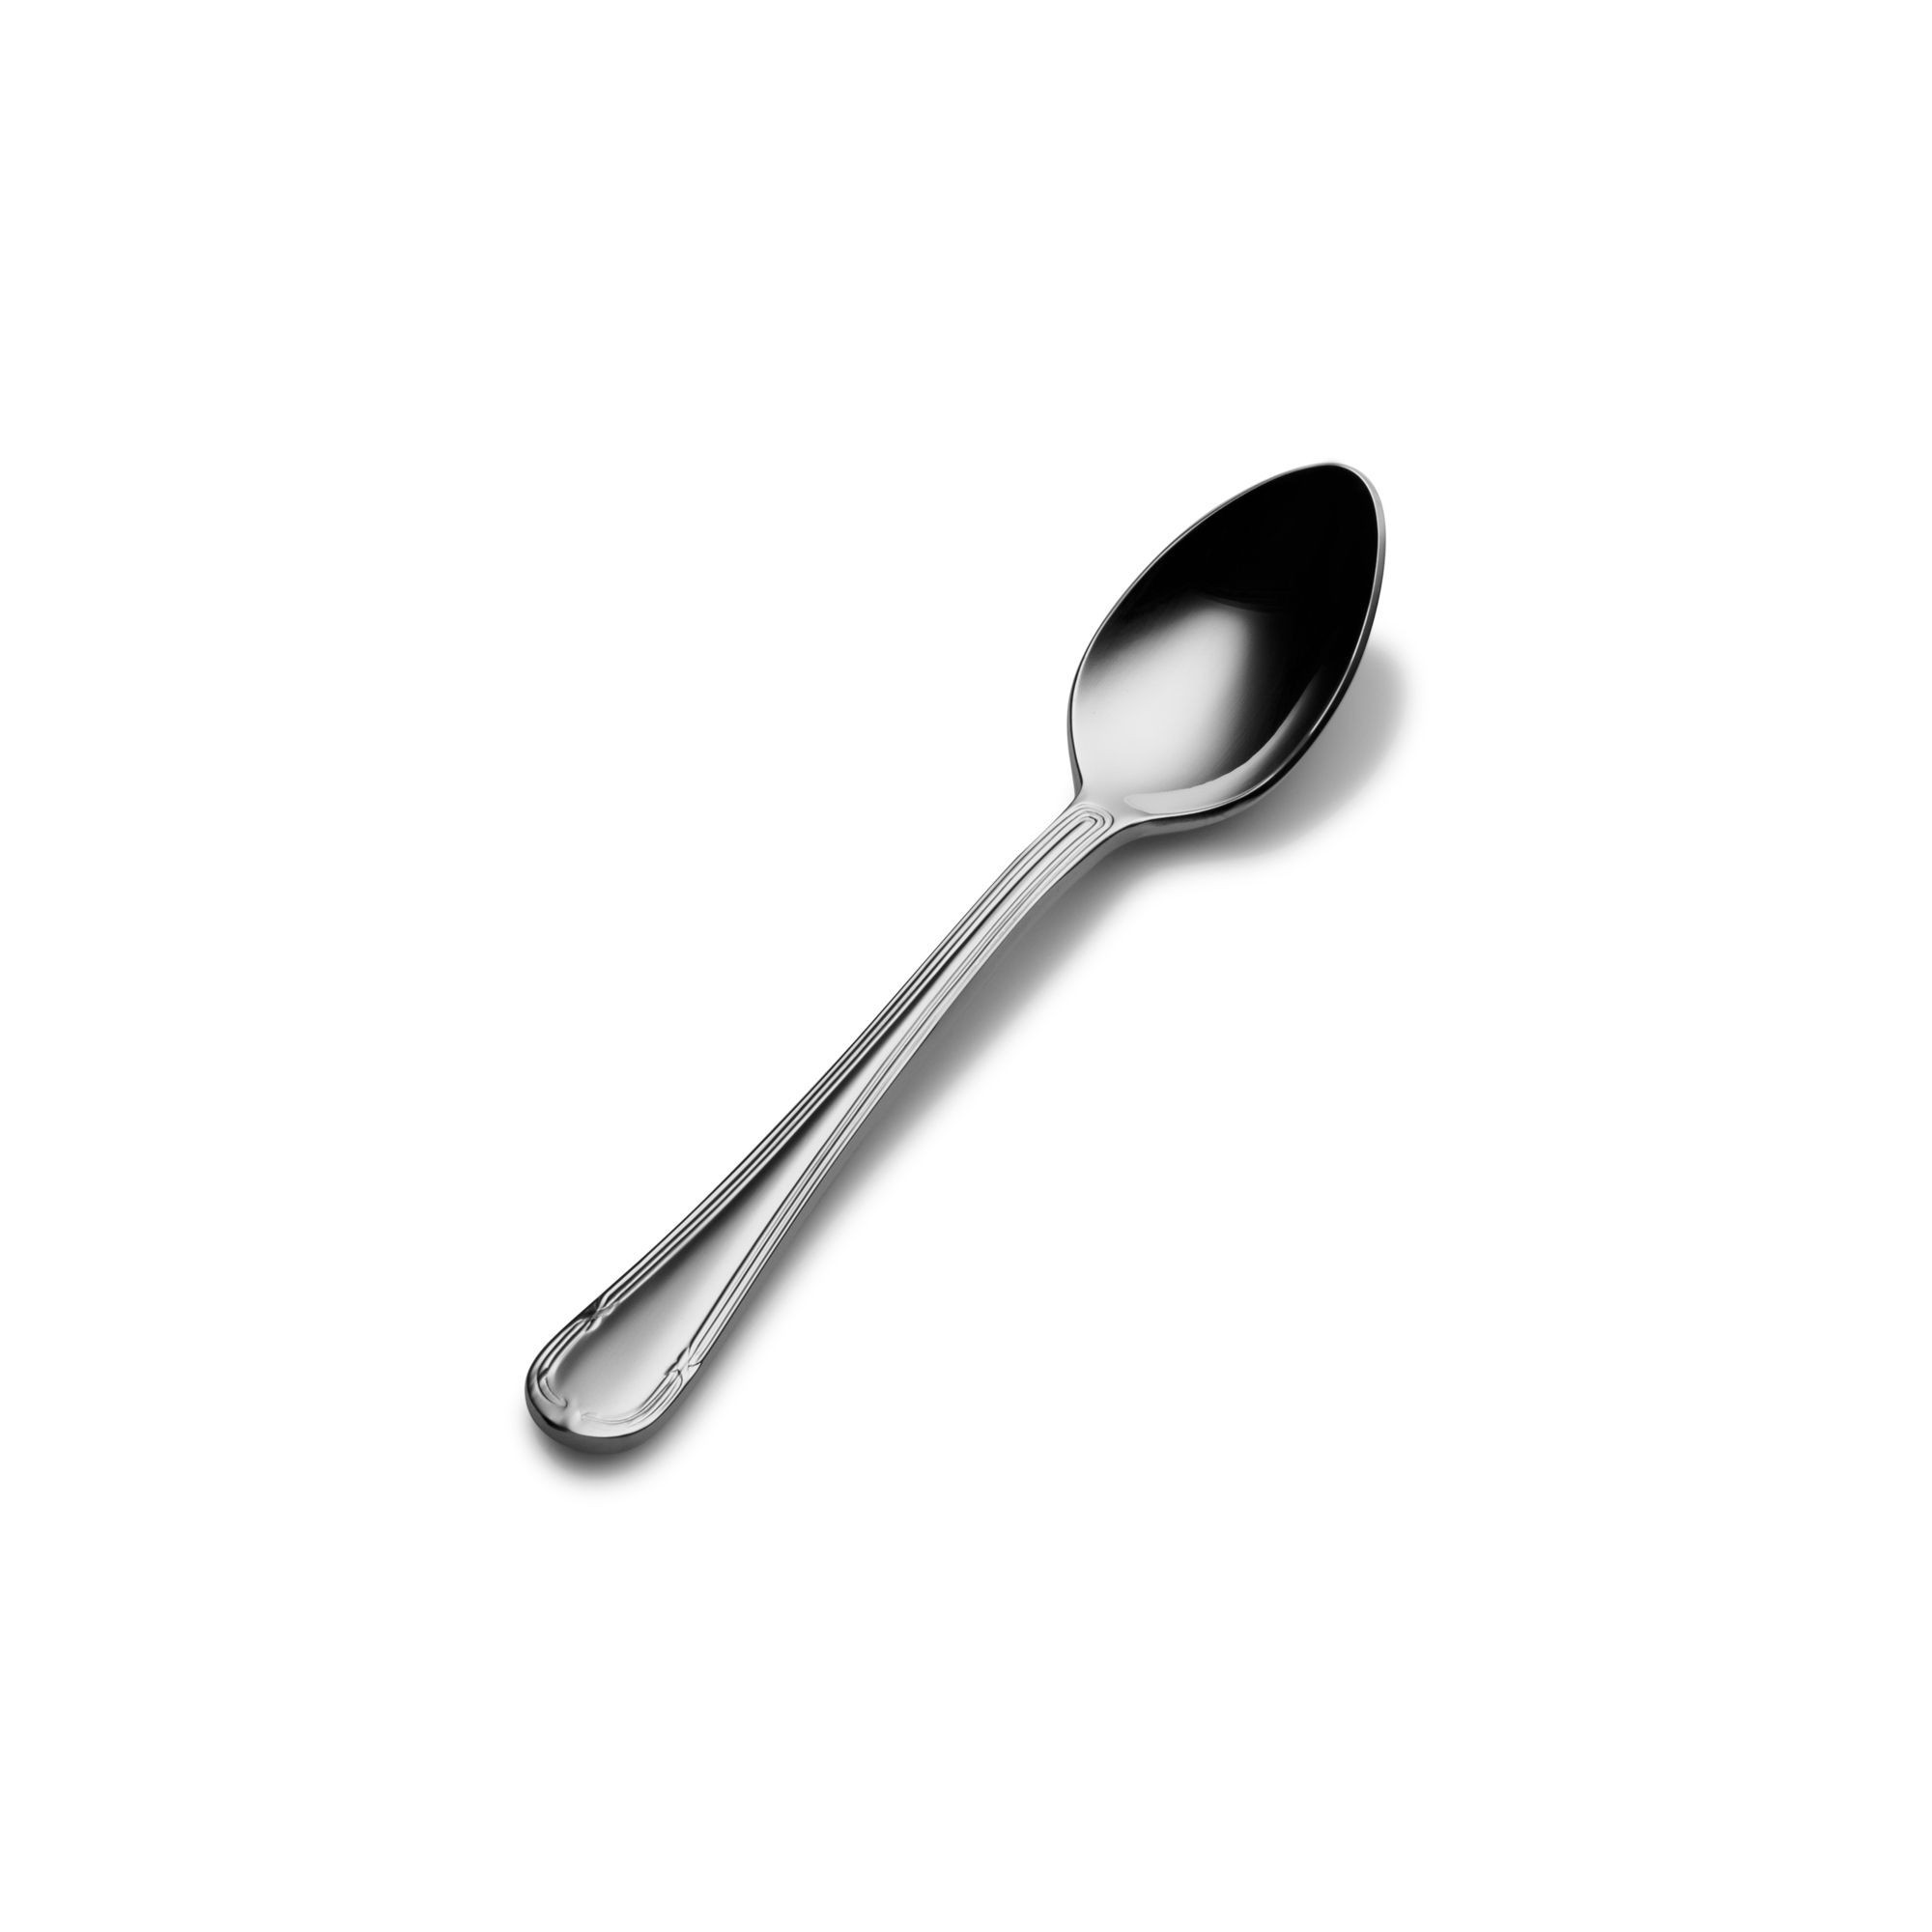 Bon Chef S816S Florence 18/8 Stainless Steel Silverplated Demitasse Spoon